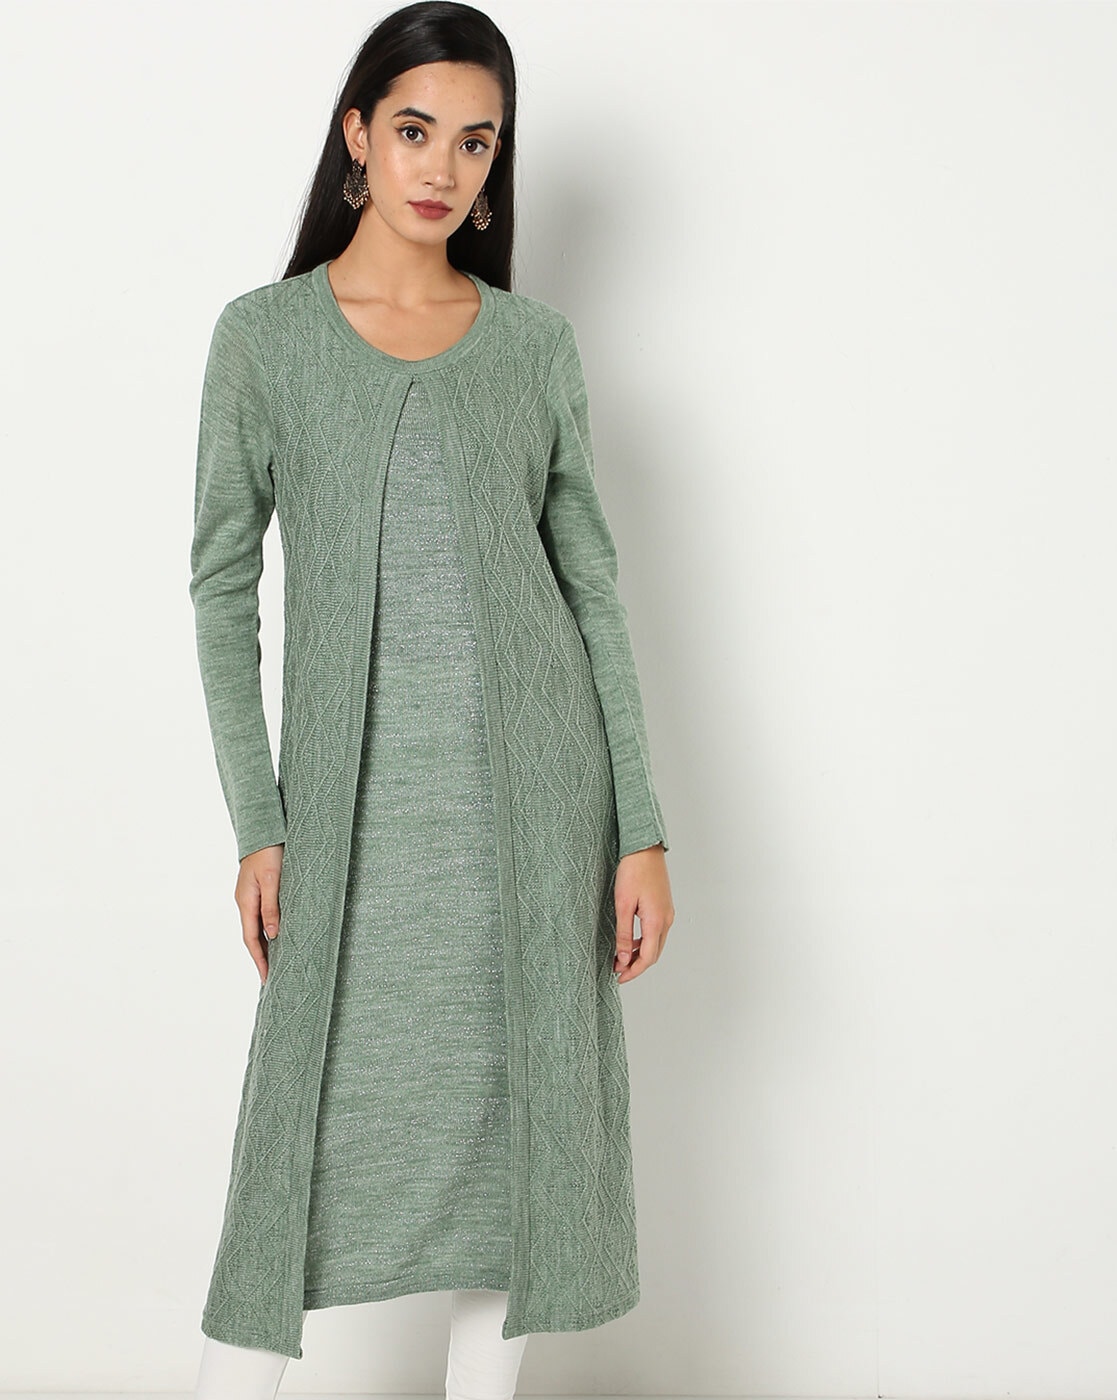 Buy Woolen Kurtis For Women At Best Prices Online In India | Tata CLiQ